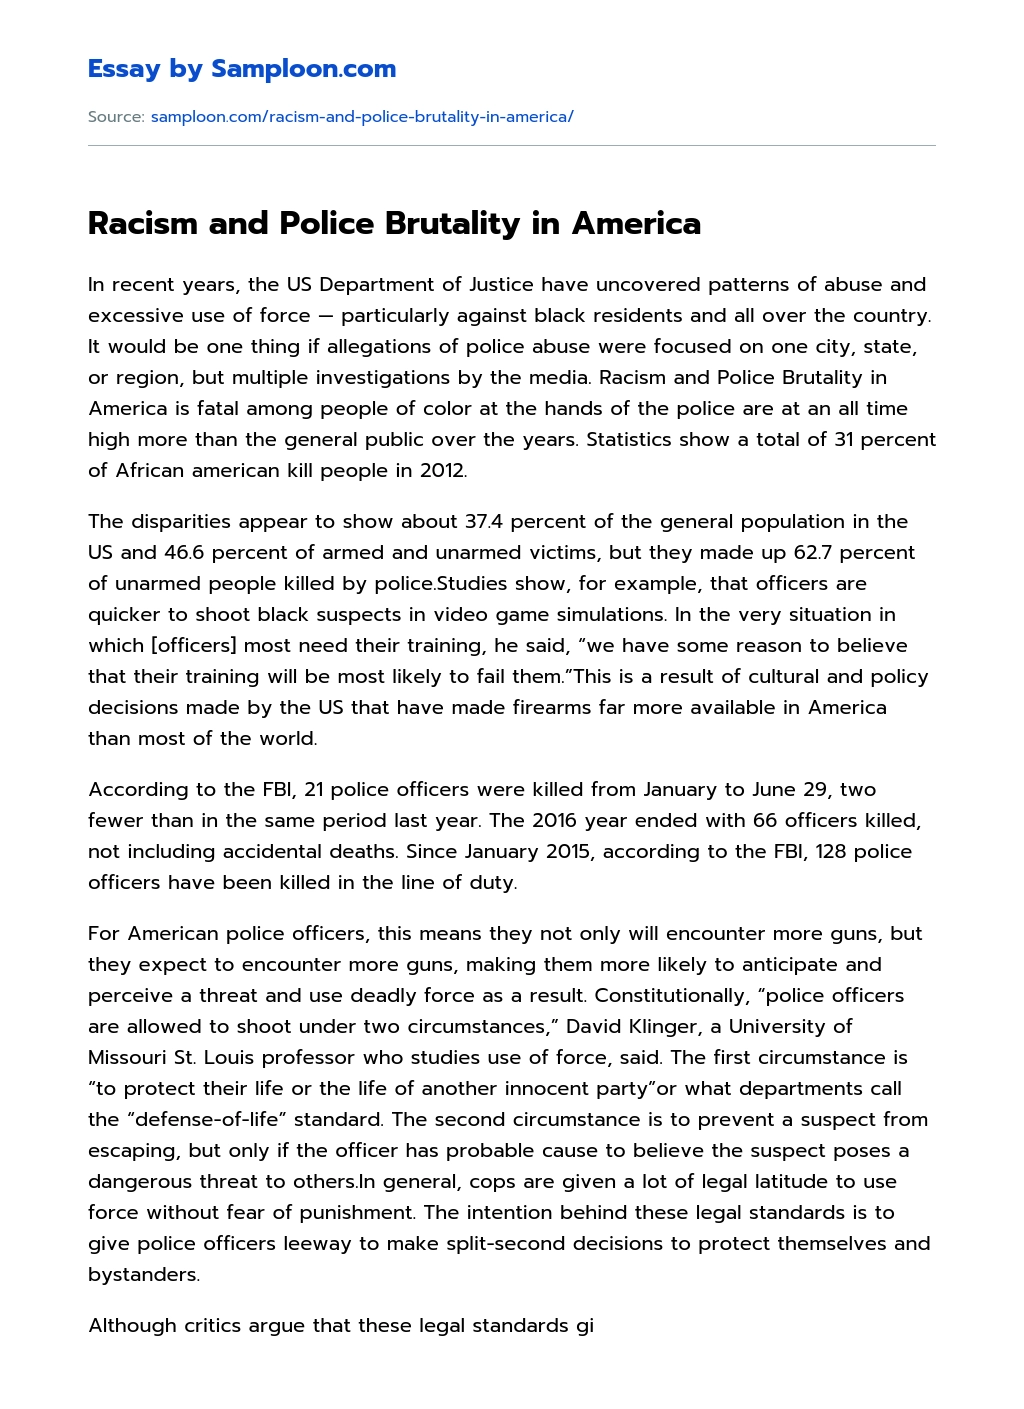 Racism and Police Brutality in America essay